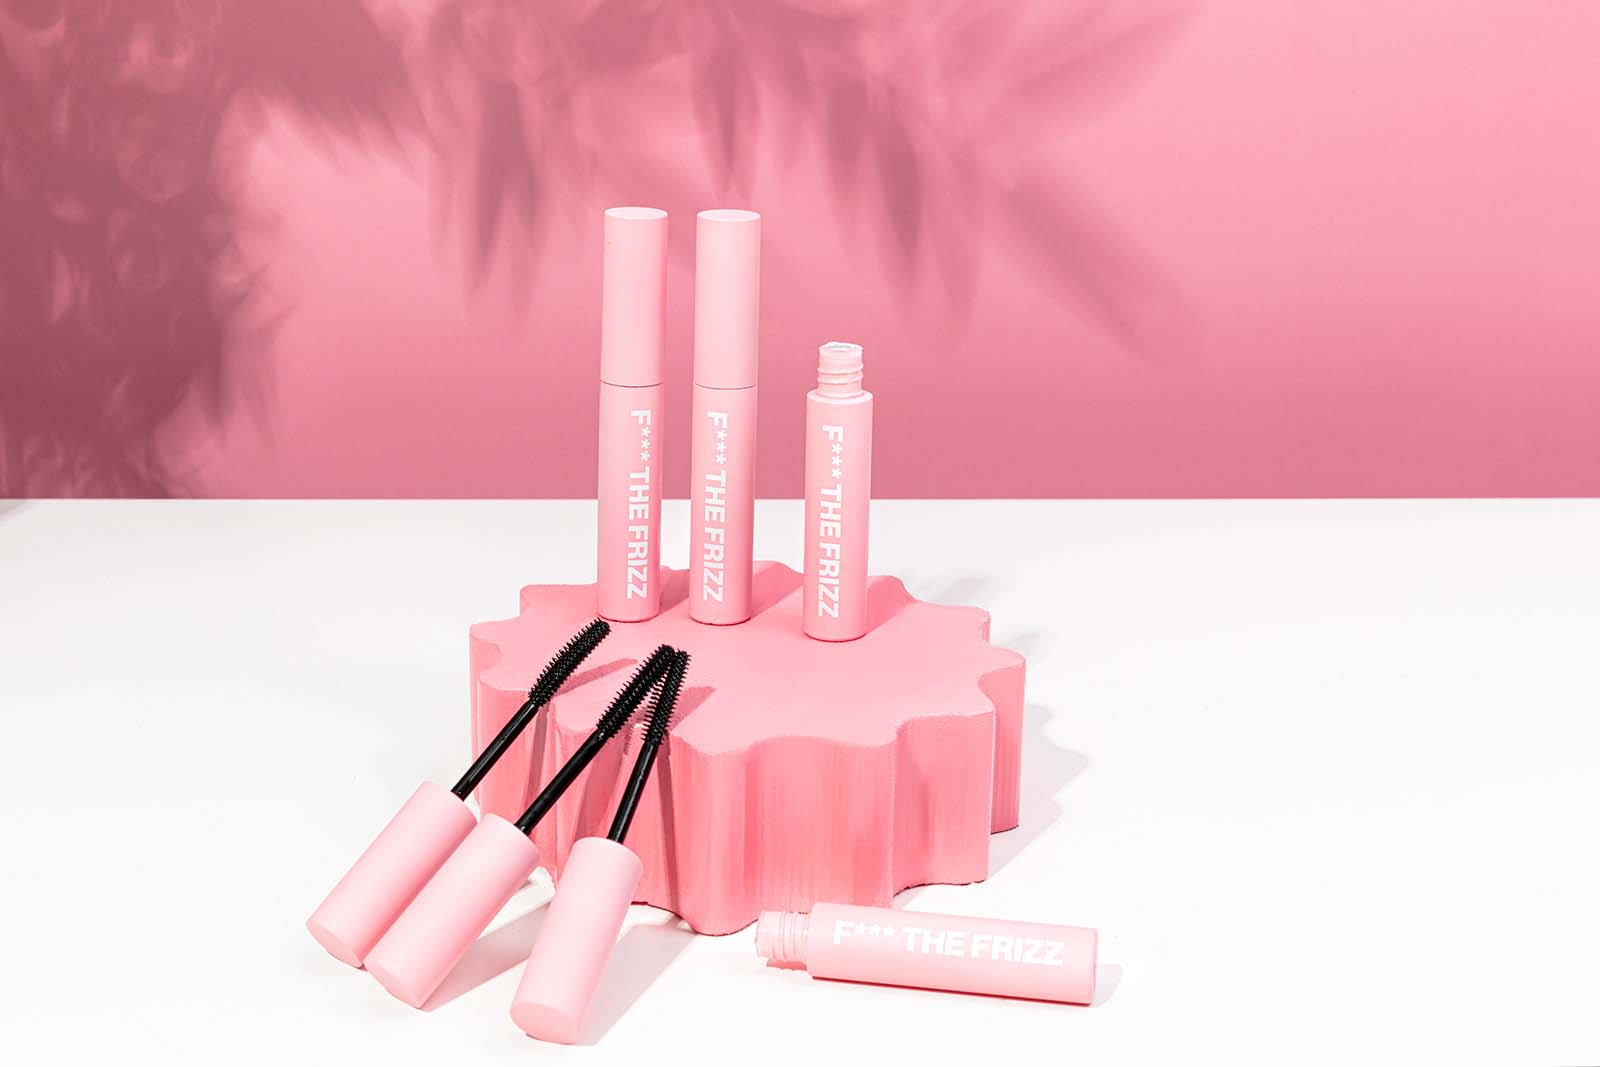 Simple Pink Product Photos with shadows for Anit Frizz Hair Wand. Styled content creation by Megzie Makes